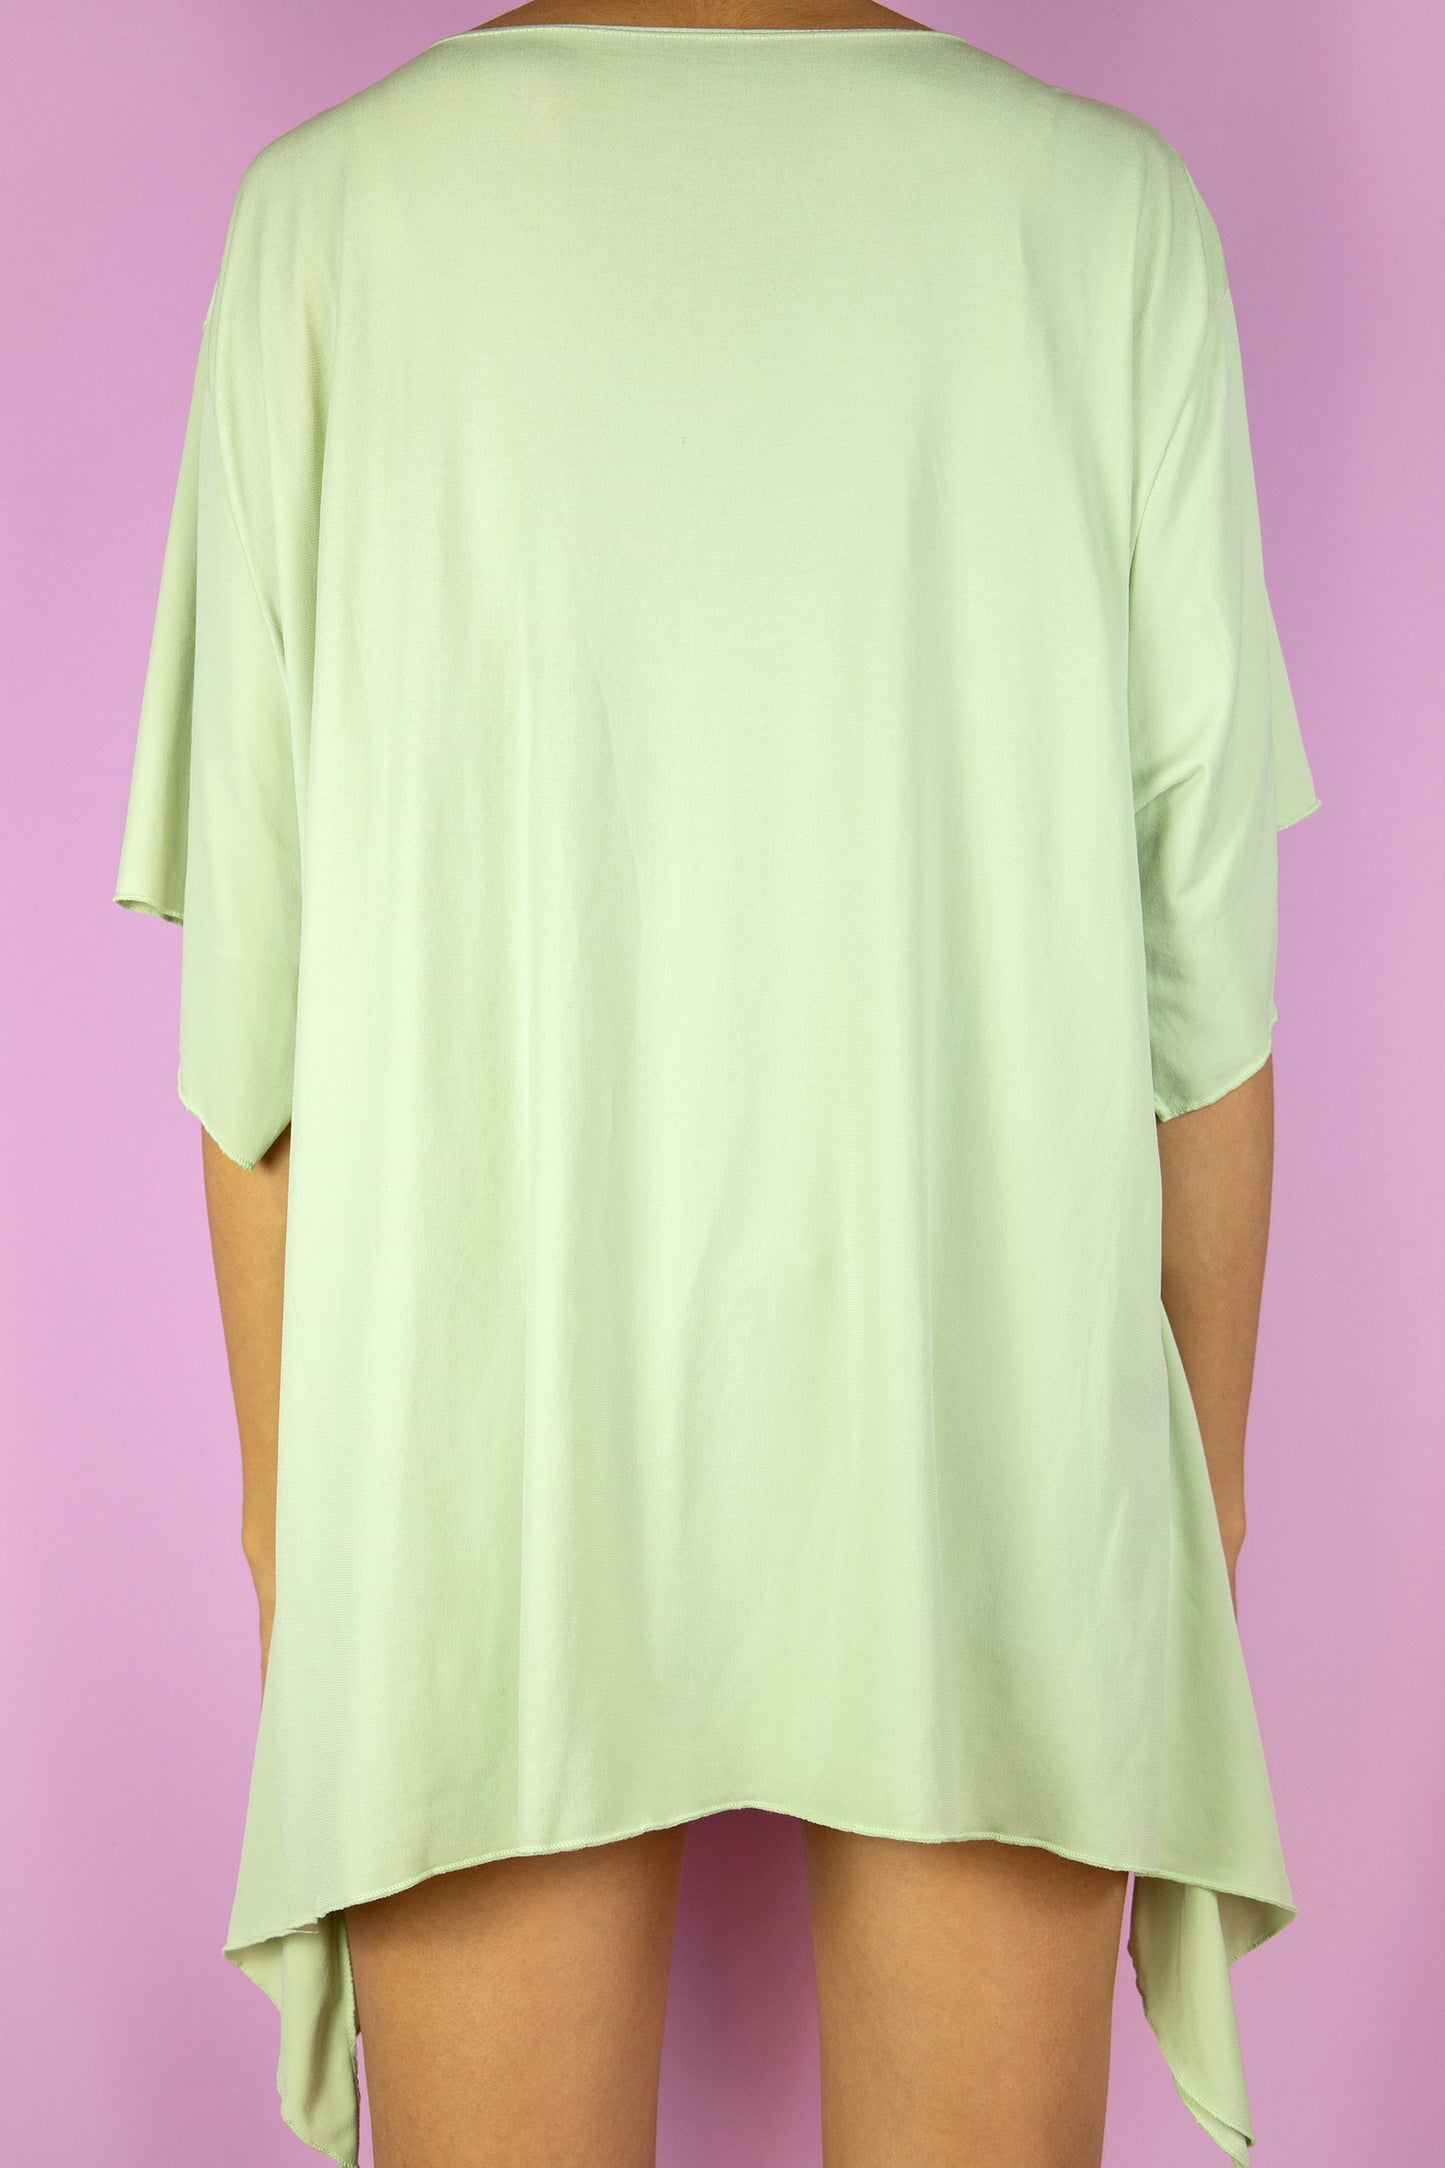 The Y2K Green Asymmetrical Top is a vintage pastel light green short sleeve shirt with an asymmetric pointed hem and an o-ring detail. Cyber fairy grunge 2000s summer top.